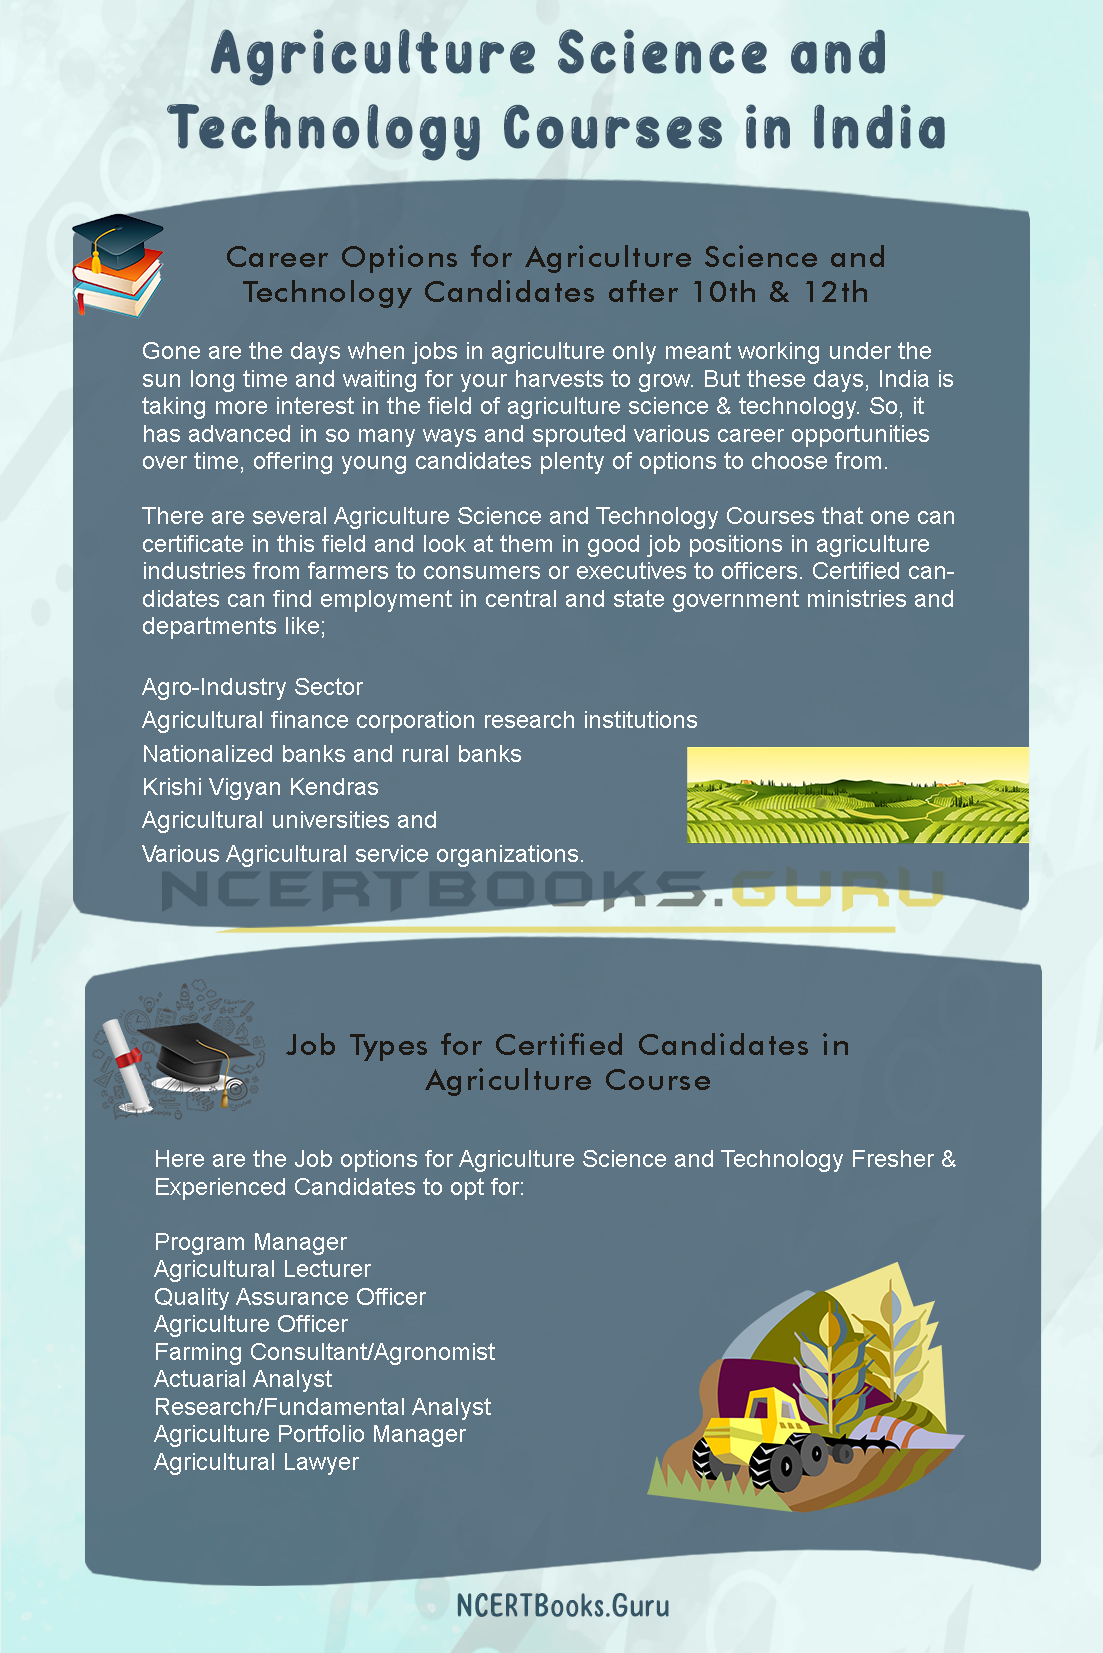 Agriculture Science and Technology Courses in India